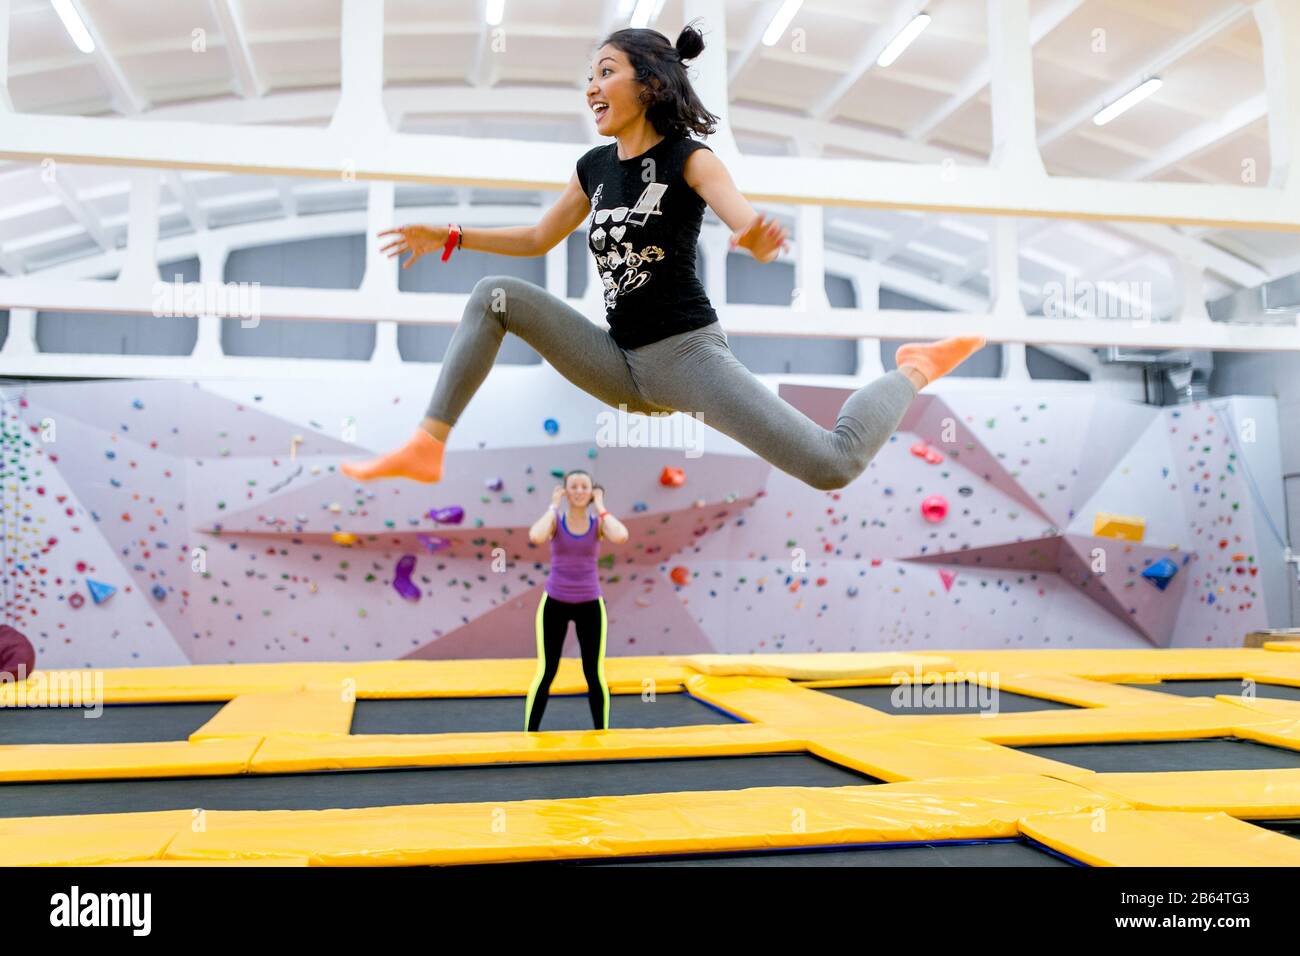 Happy brunette jumping on trampoline Stock Photo